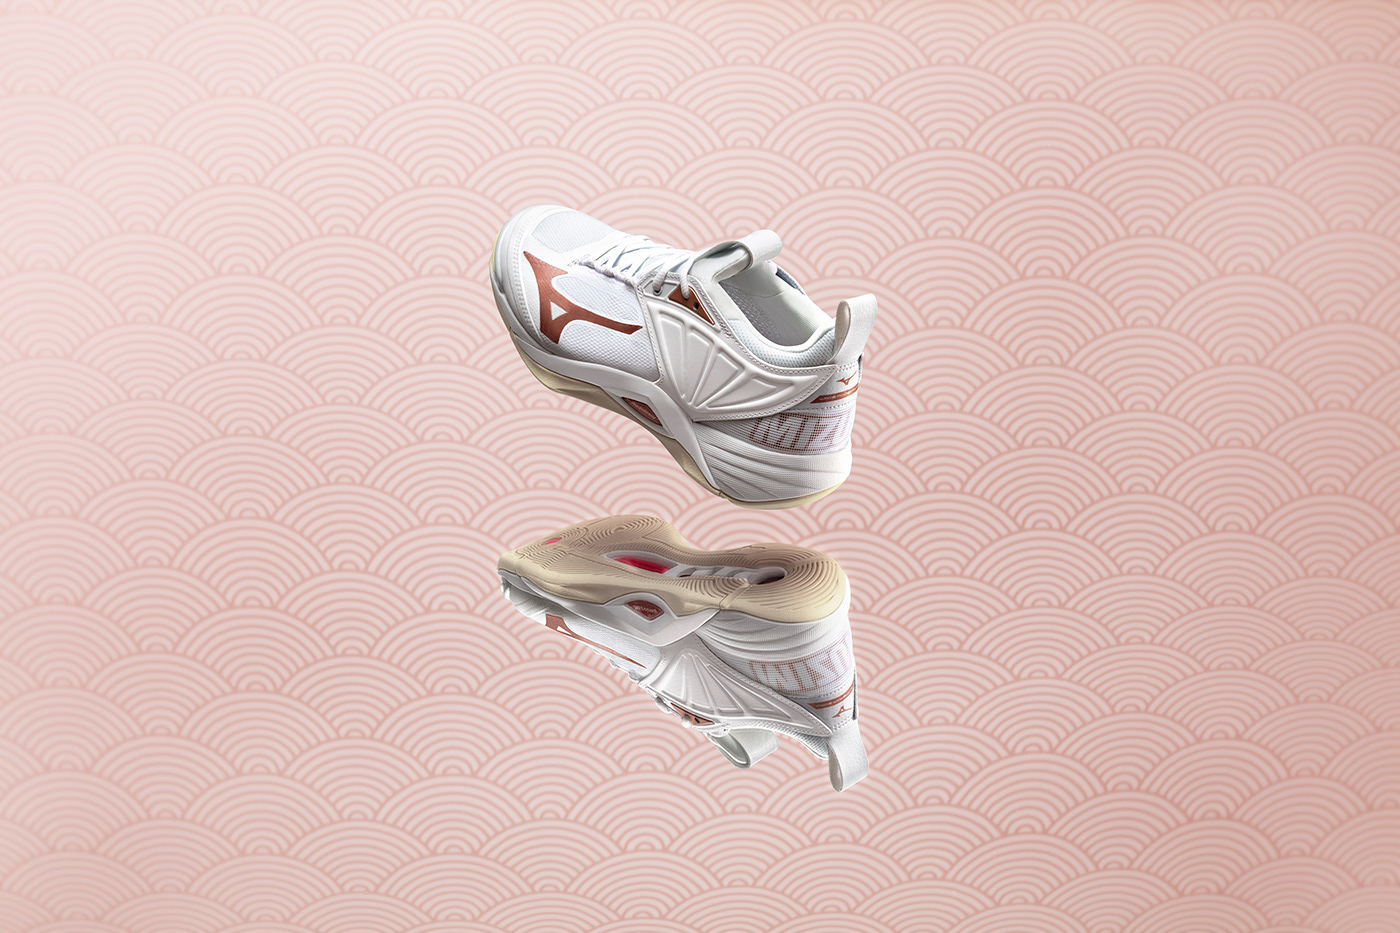 Mizuno sports sport shoes still life photography commercial Studio Photography tennisshoes